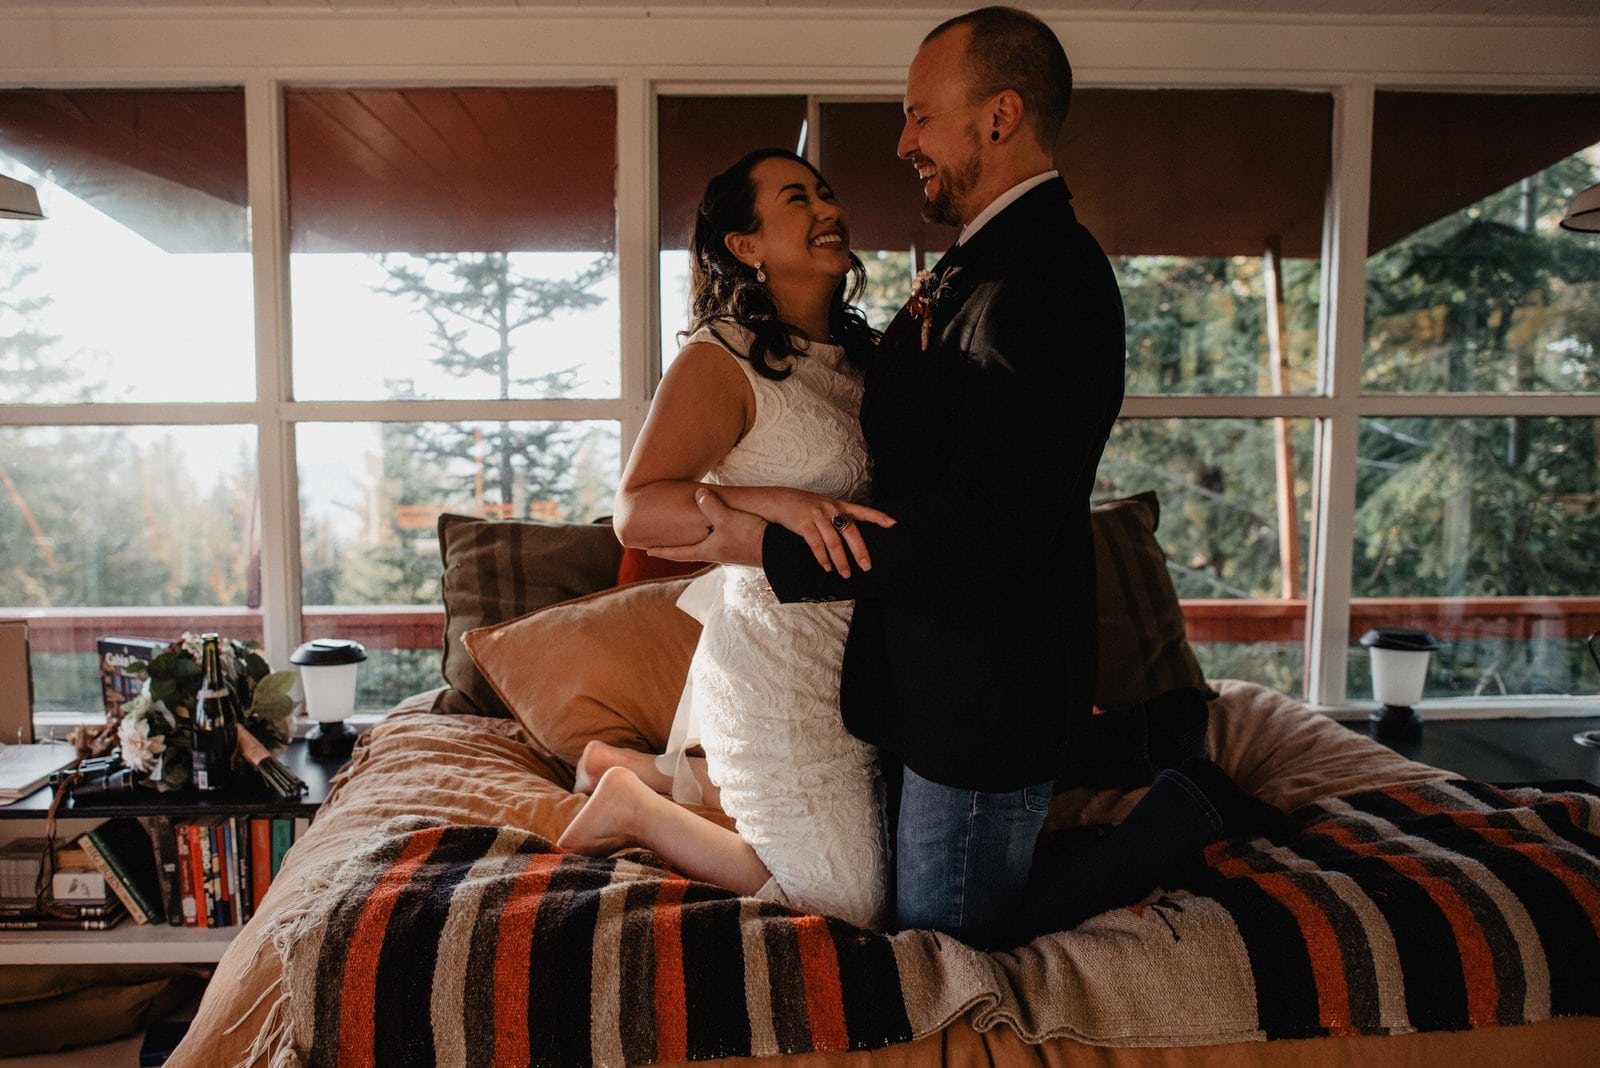 intimate moment during simple elopement.